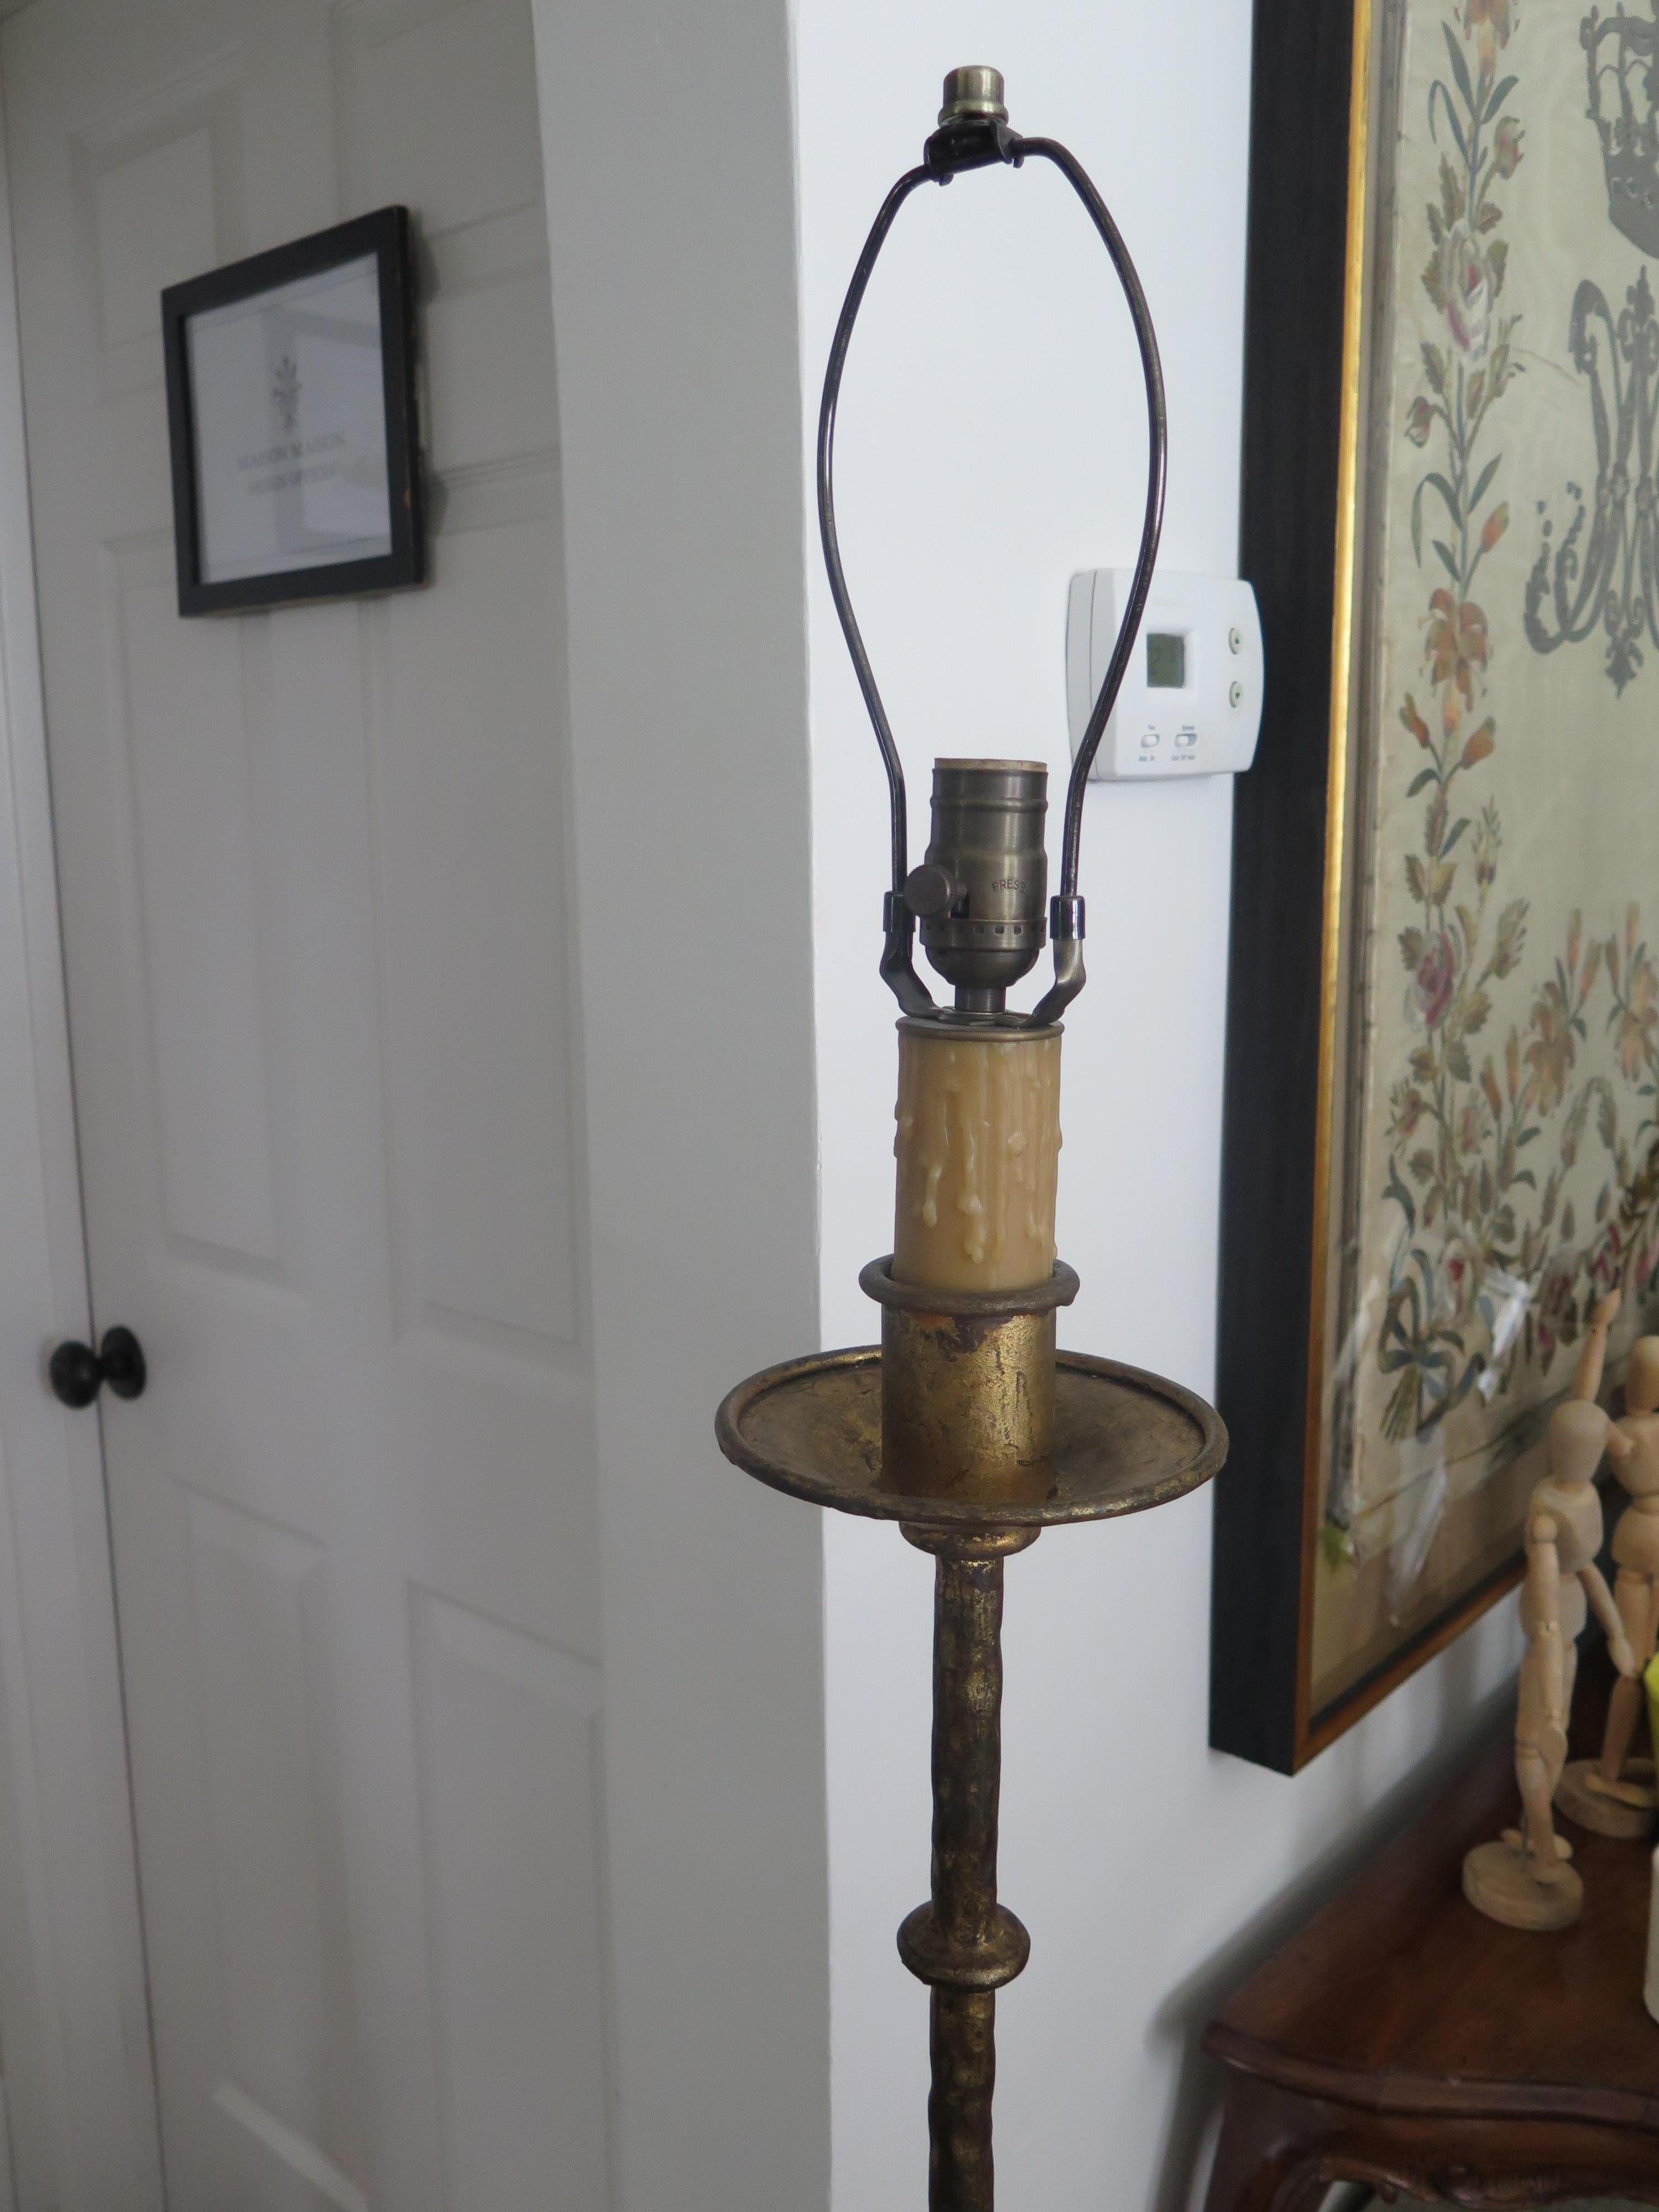 Antique baroque iron torchière already wired and ready for use. Floor lamp measures 59